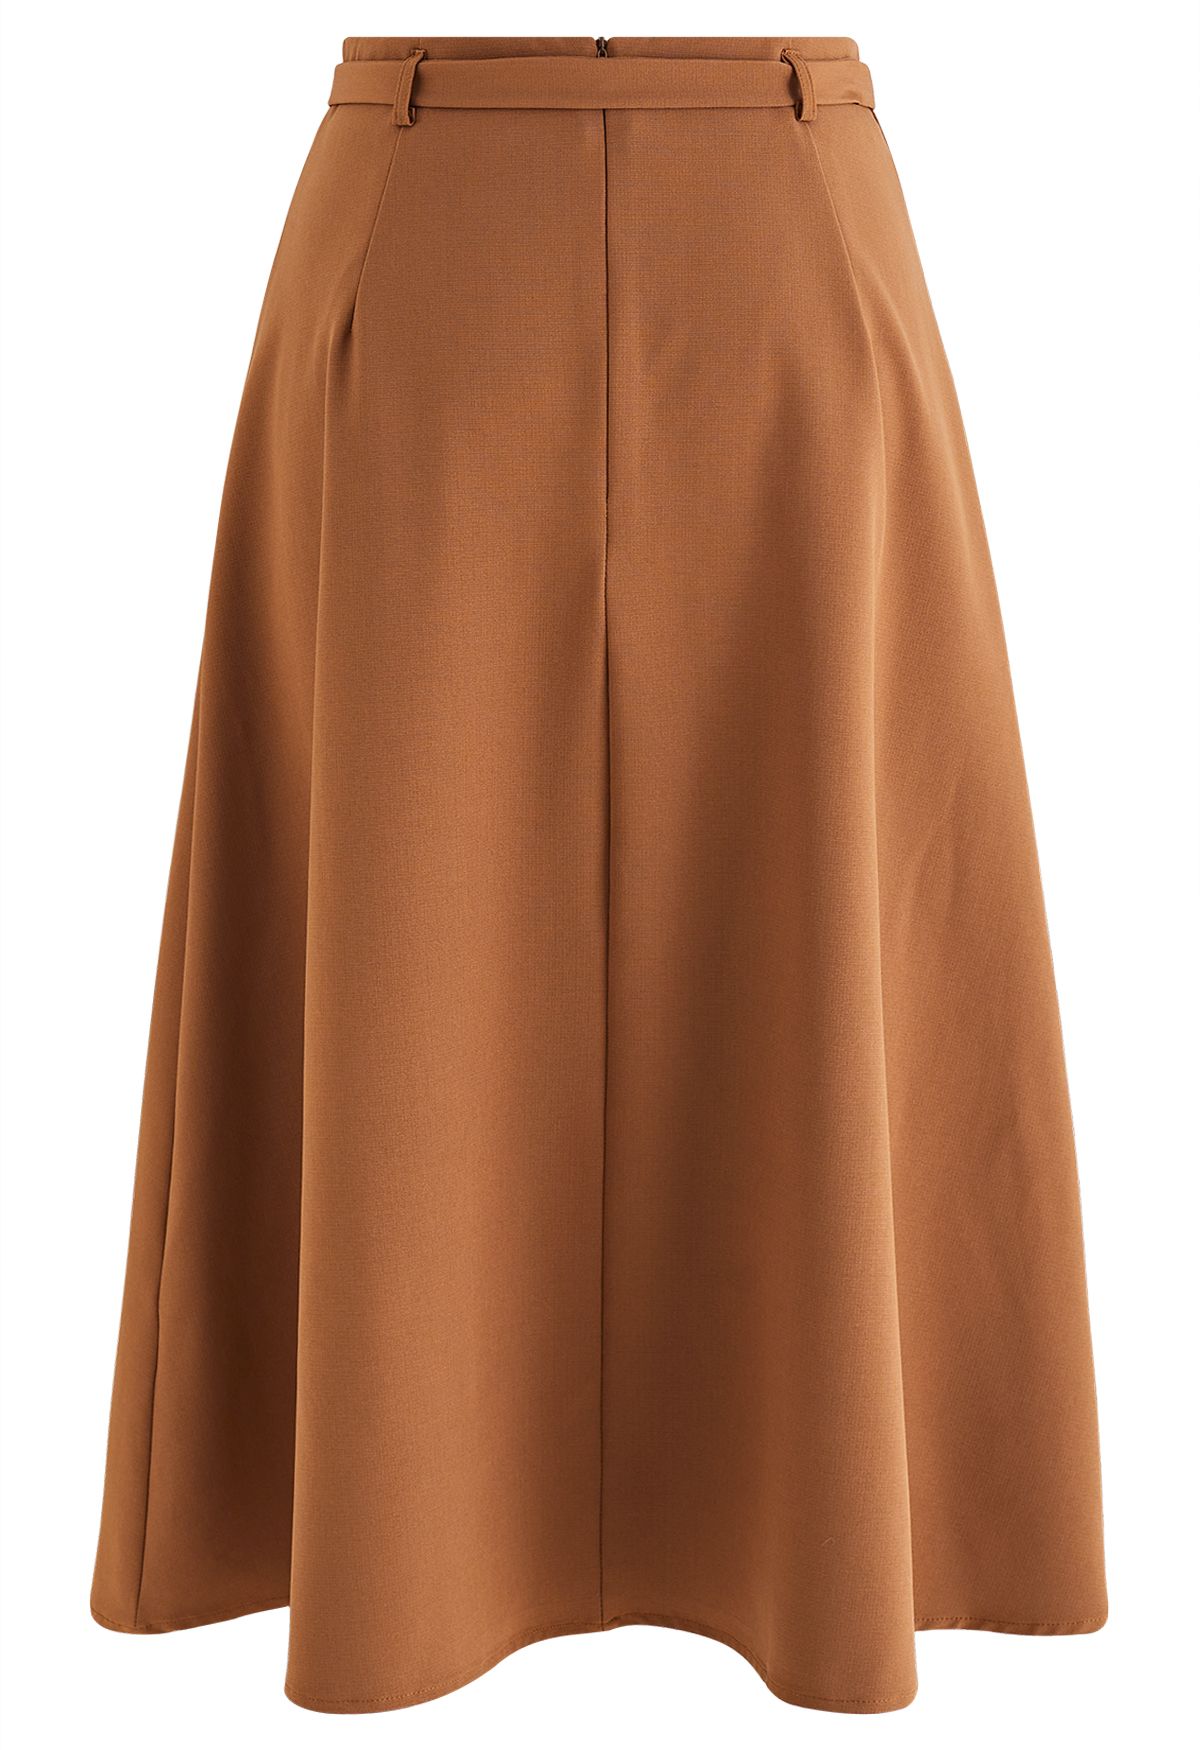 Belted Pleated A-Line Midi Skirt in Pumpkin